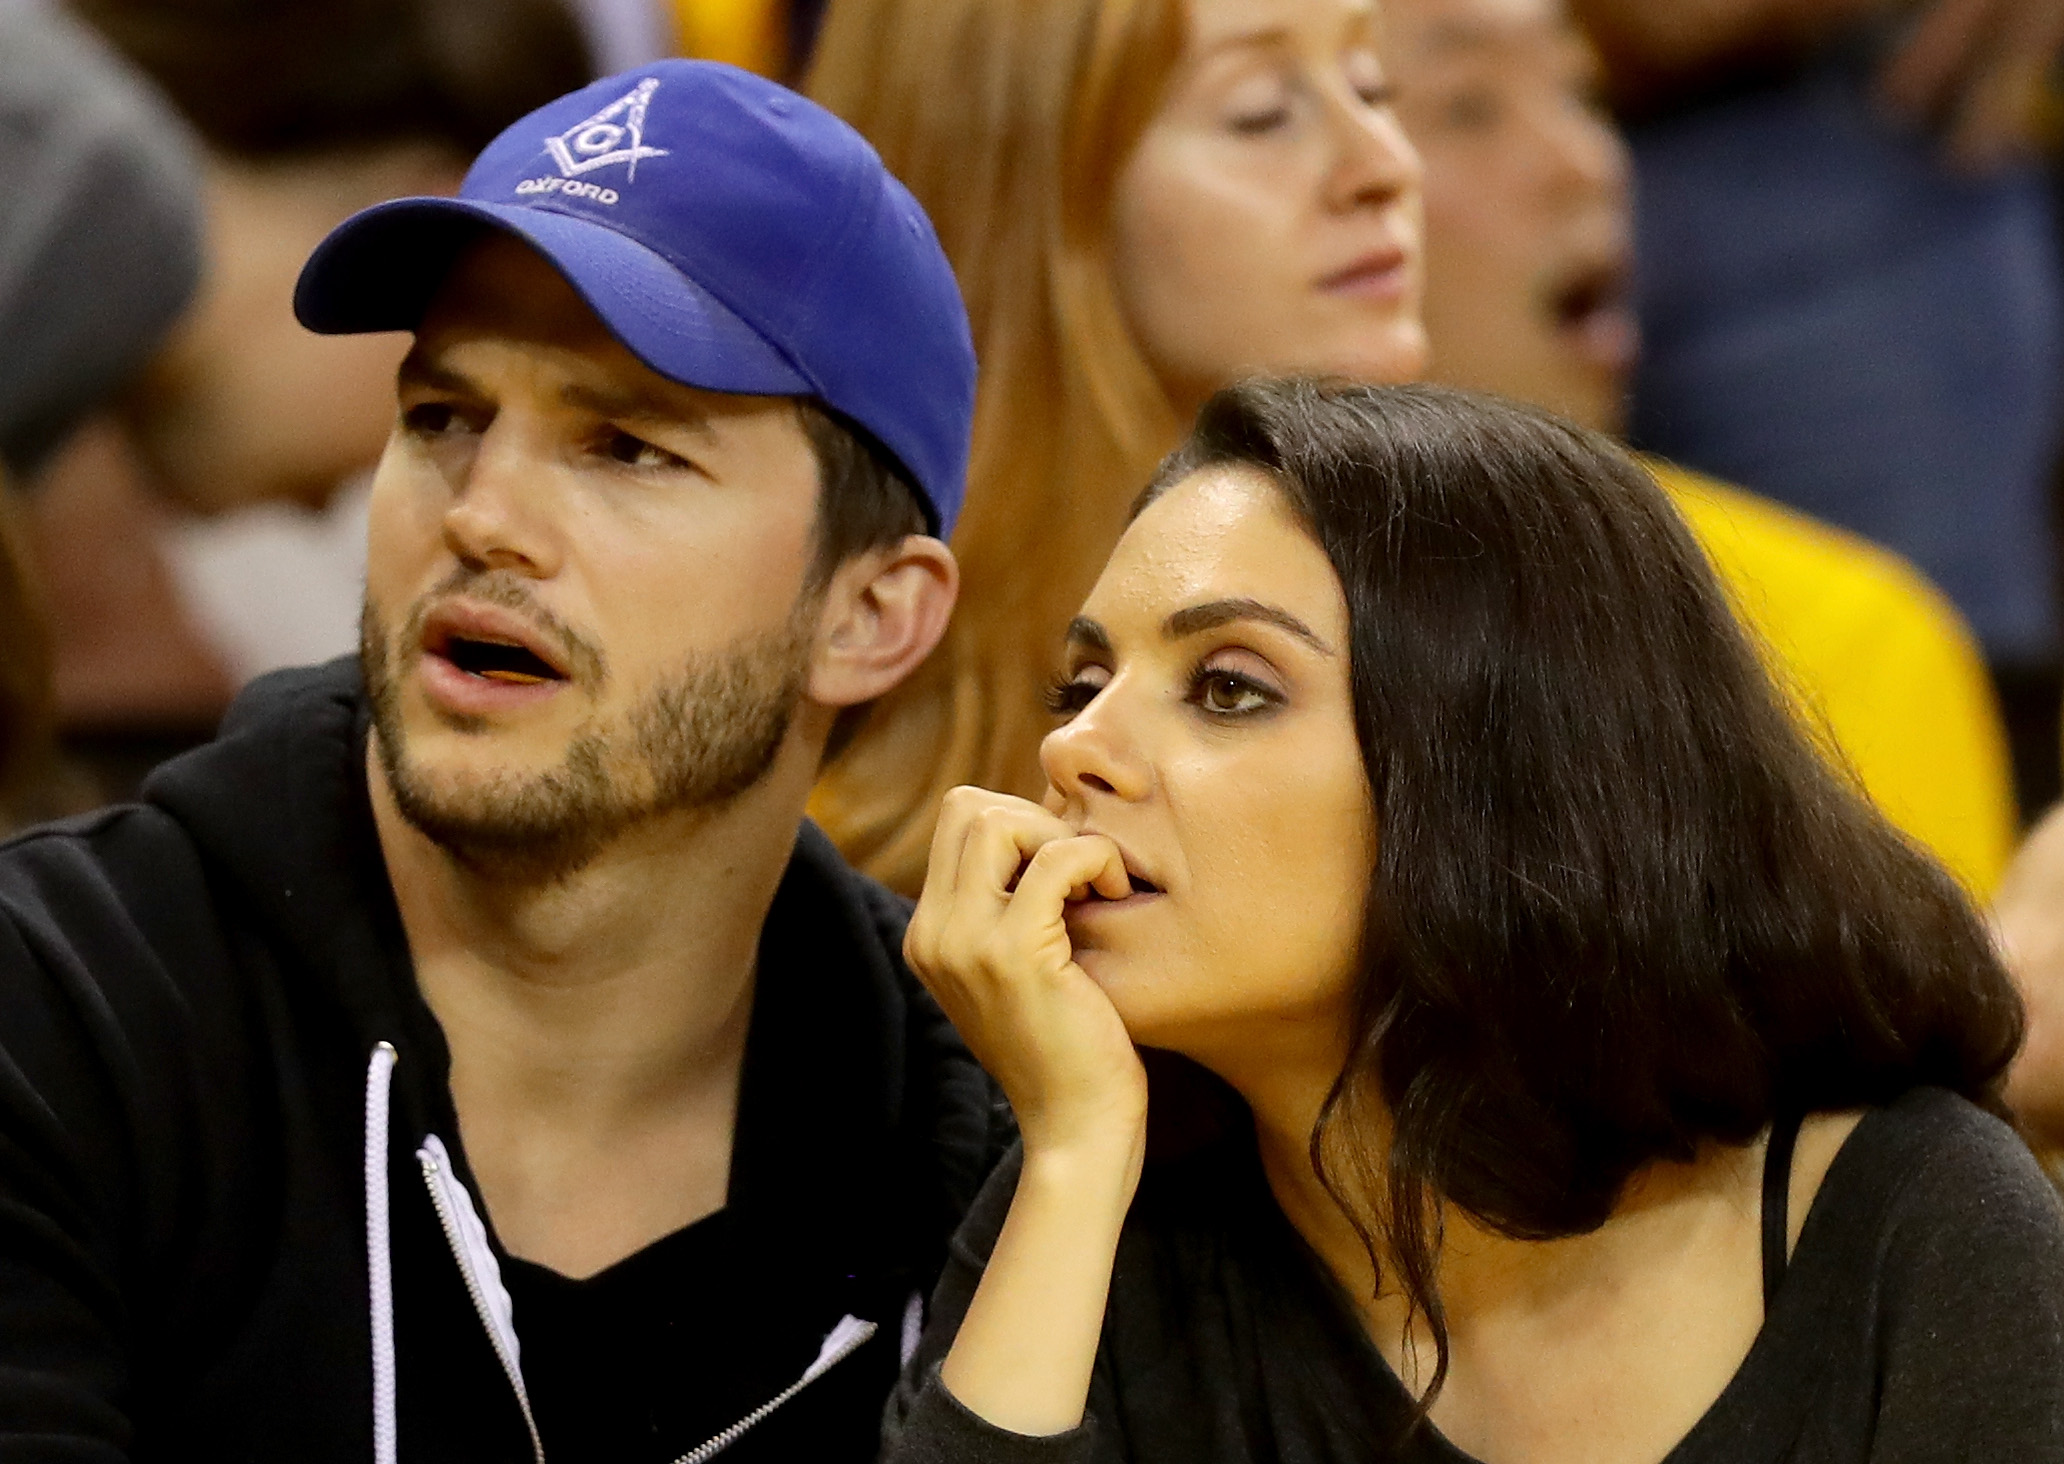 OAKLAND, CA - JUNE 05: (L-R) Actors Ashton Kutcher and Mila Kunis attend Game 2 of the 2016 NBA Finals between the Golden State Warriors and the Cleveland Cavaliers at ORACLE Arena on June 5, 2016 in Oakland, California. NOTE TO USER: User expressly acknowledges and agrees that, by downloading and or using this photograph, User is consenting to the terms and conditions of the Getty Images License Agreement.   Ezra Shaw/Getty Images/AFP